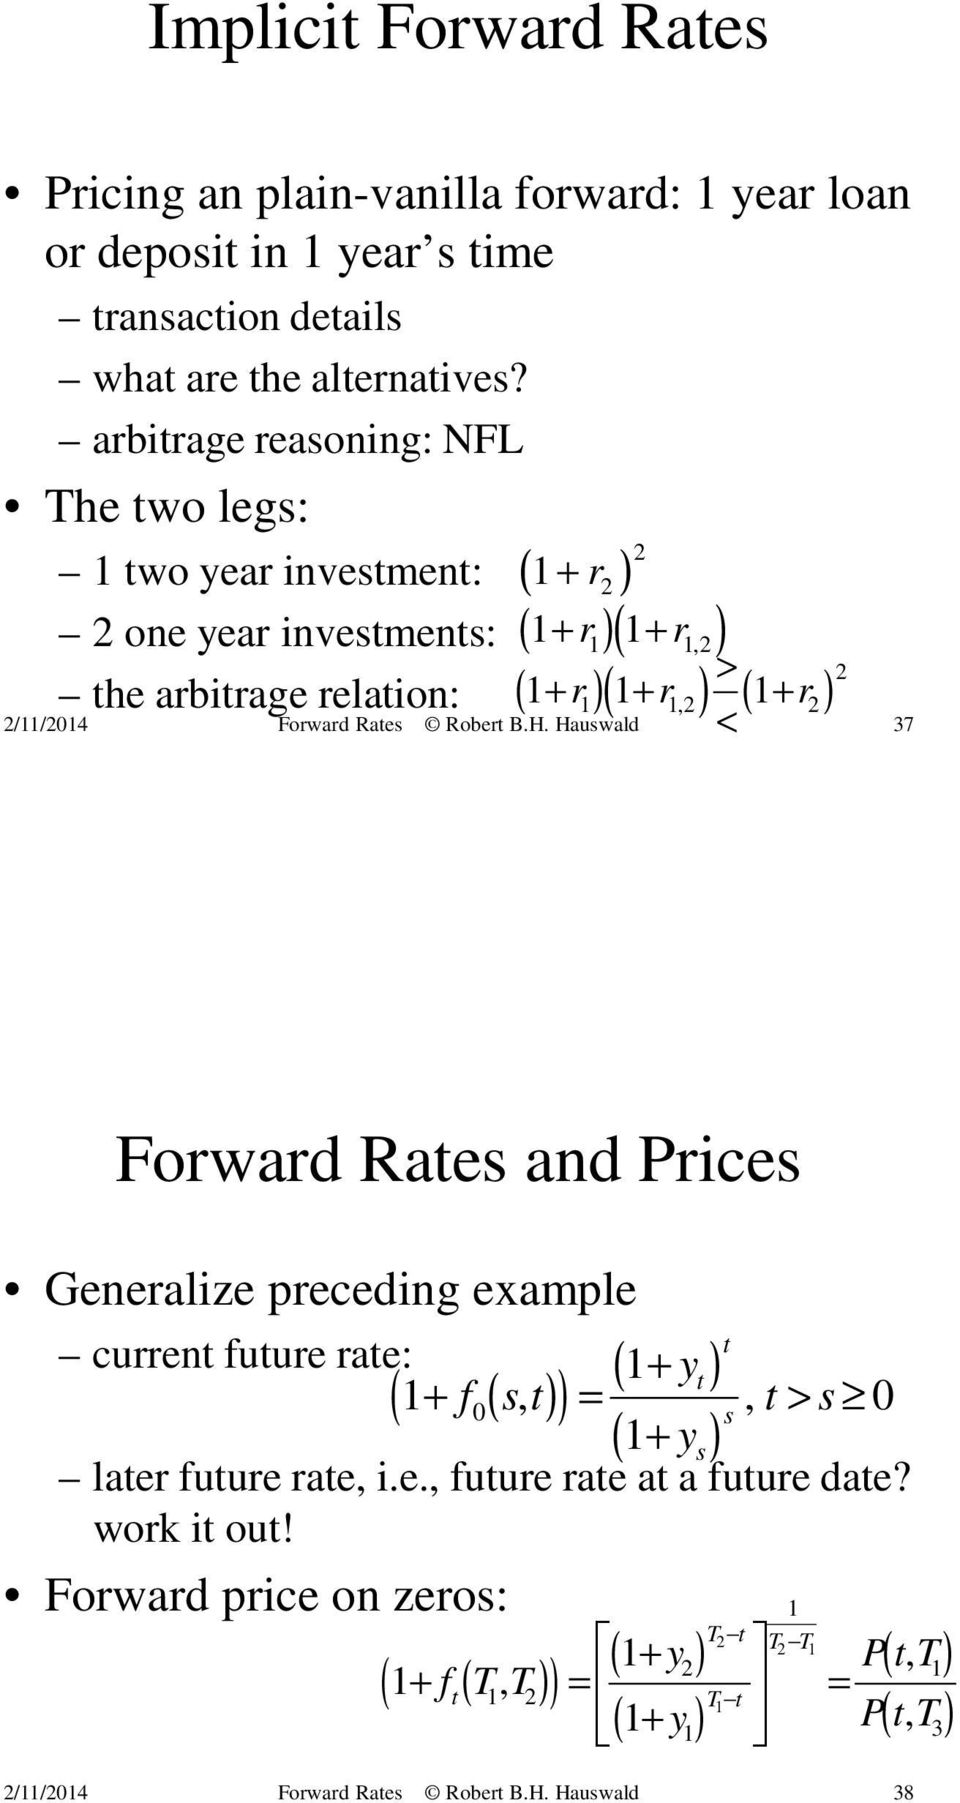 ) ( 1 r ) 2 1 1, 2 2 37 < + Forward Rates and Prices Generalize preceding example current future rate: 1 ( 1+ 0( )) = + t yt f s, t, t > s 0 s ( 1+ ys) later